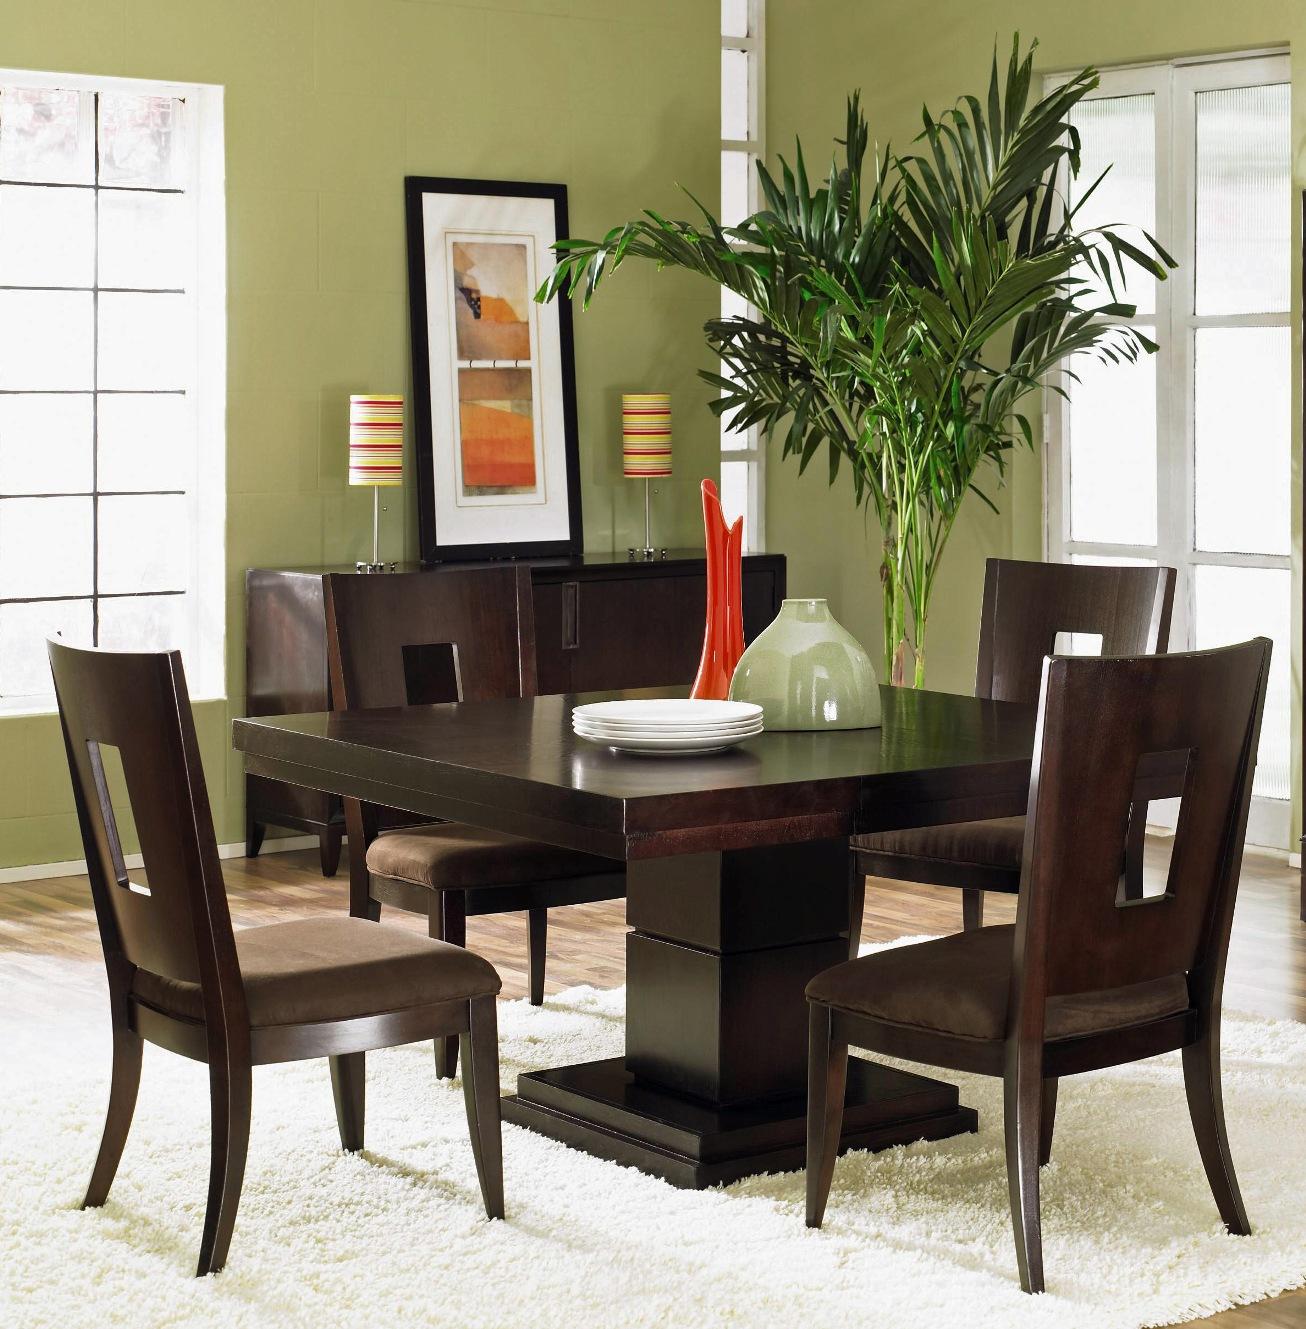 Evalotte Daily Home: Dining Room Furniture Ideas